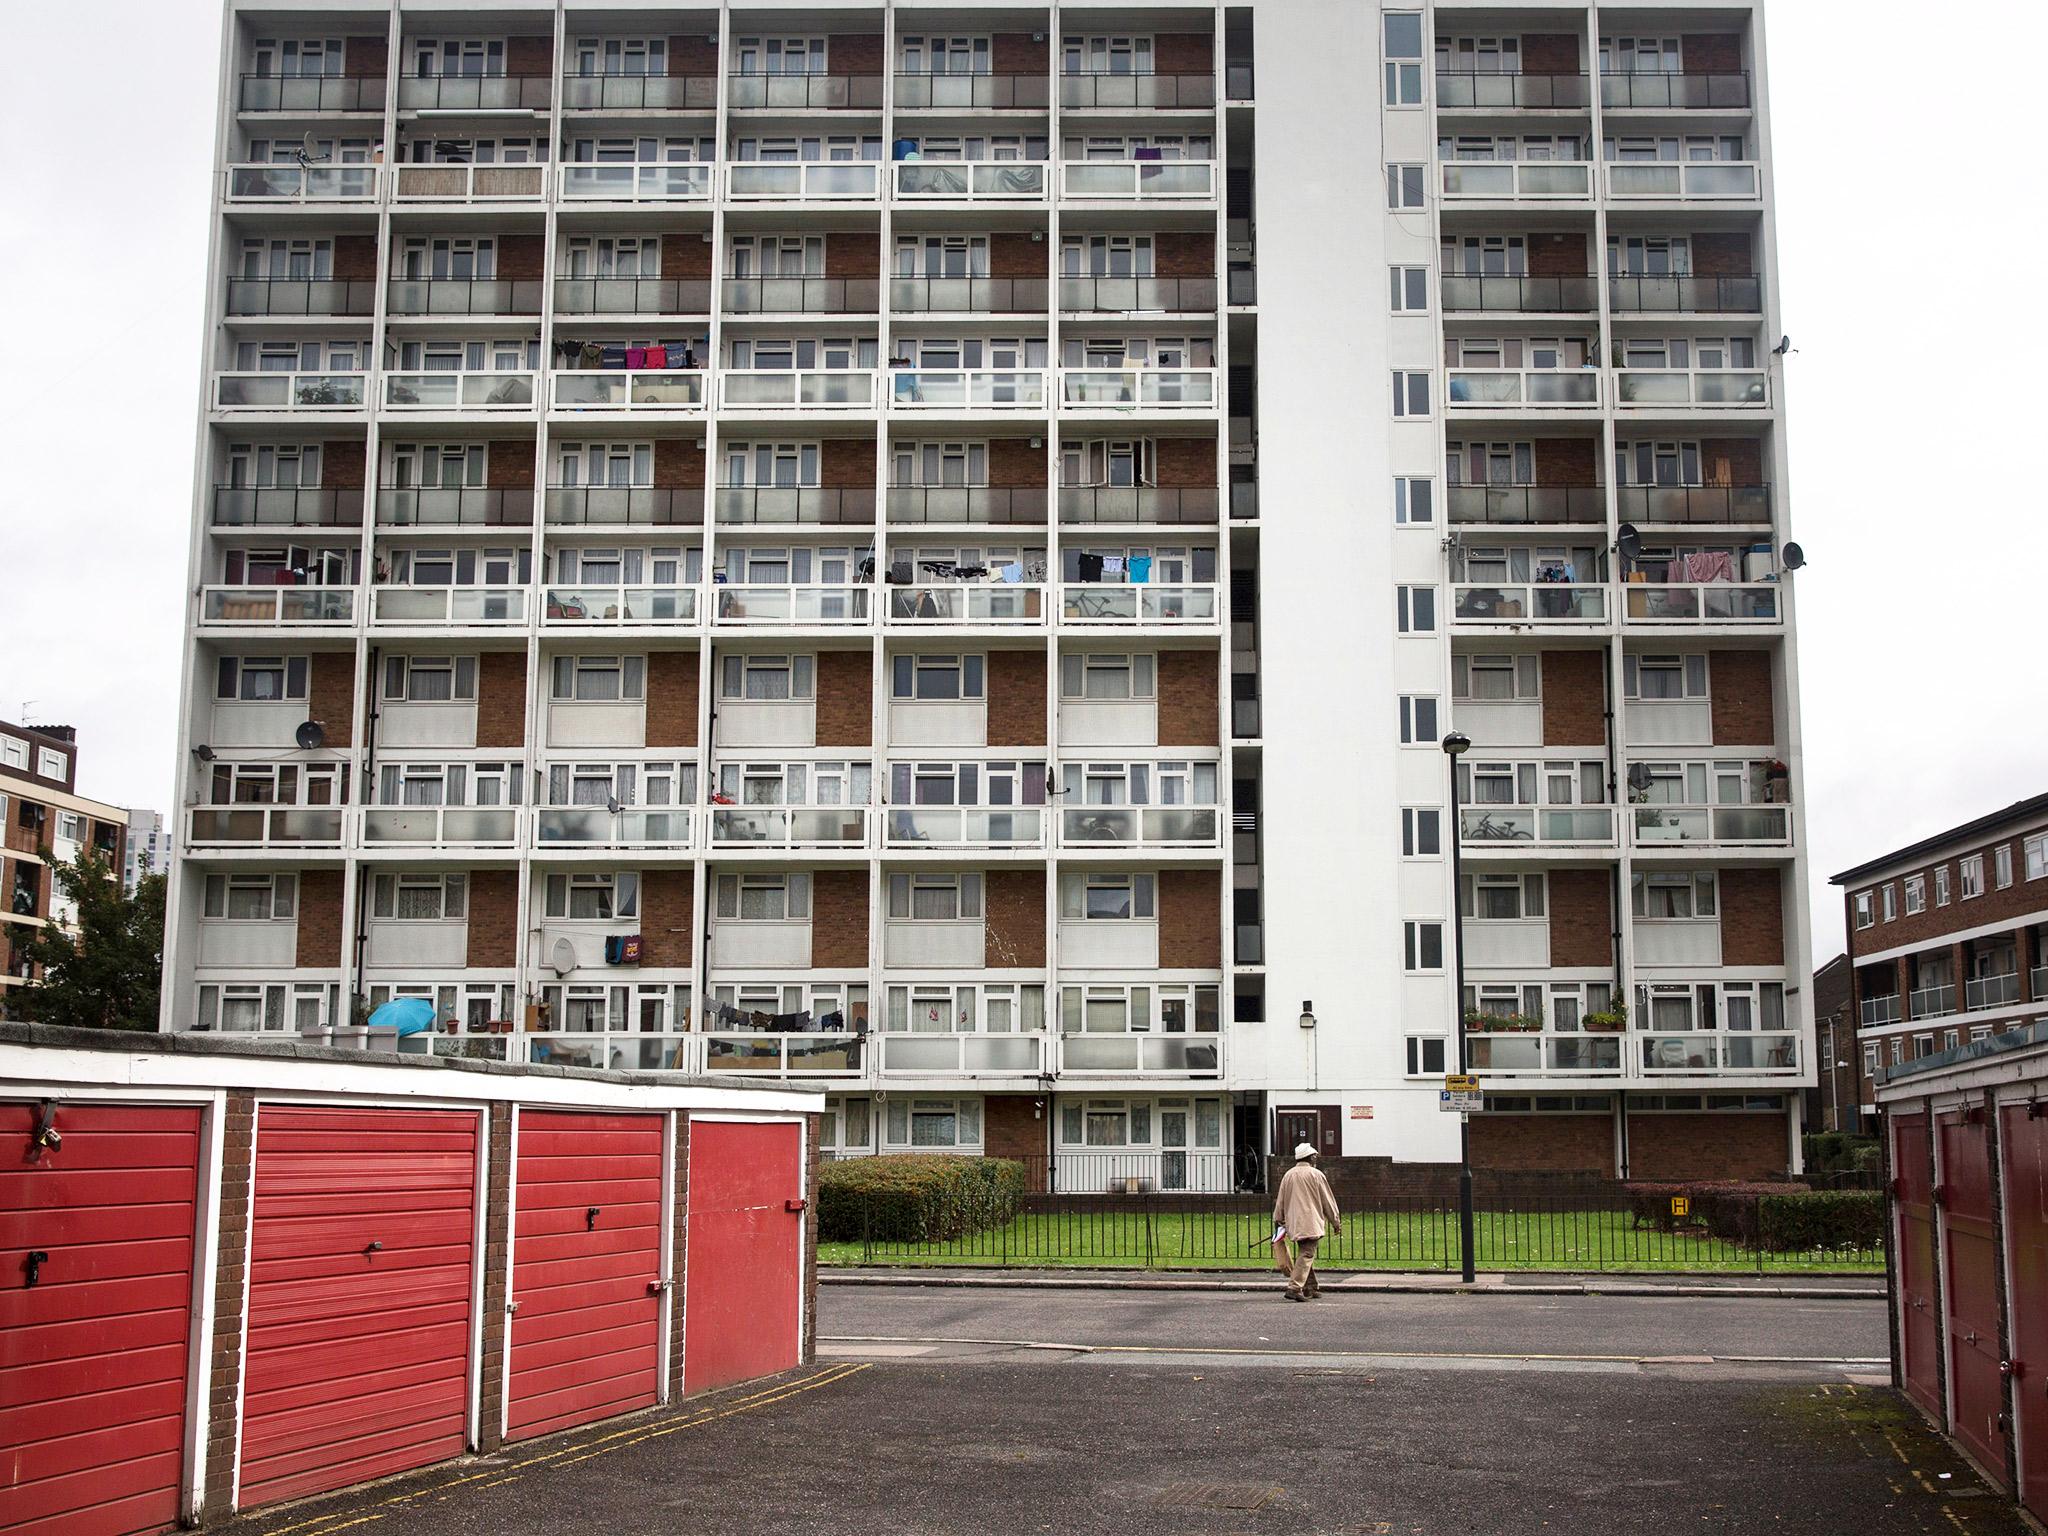 A residential tower block in Lambeth, south London (Getty Images)